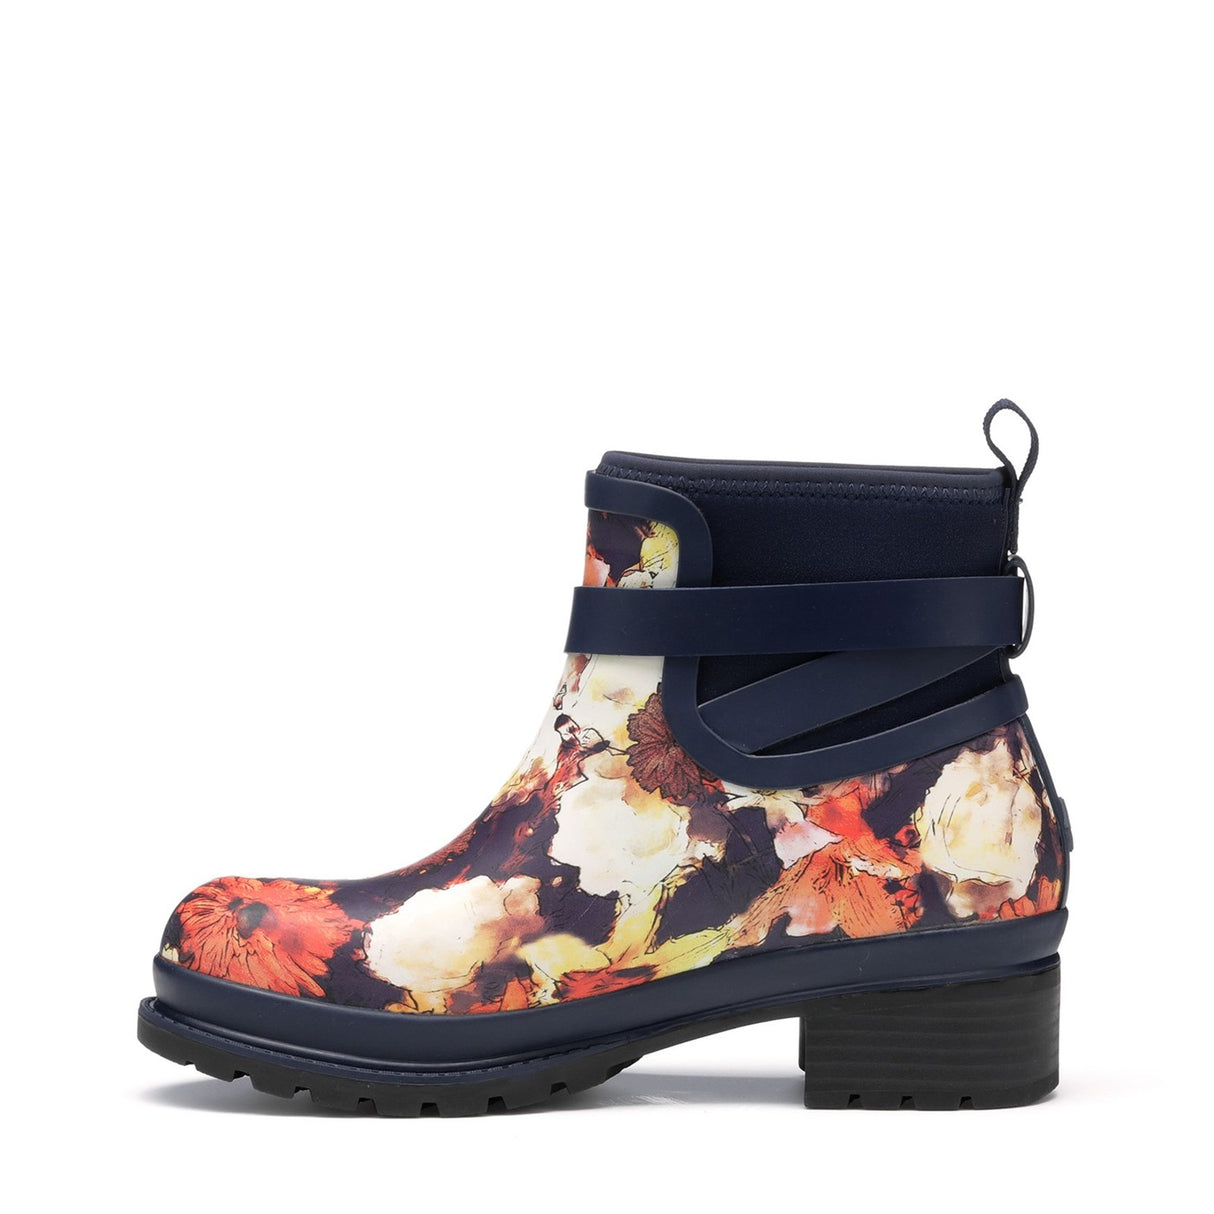 Women's Liberty Rubber Ankle Boots Navy Floral Print